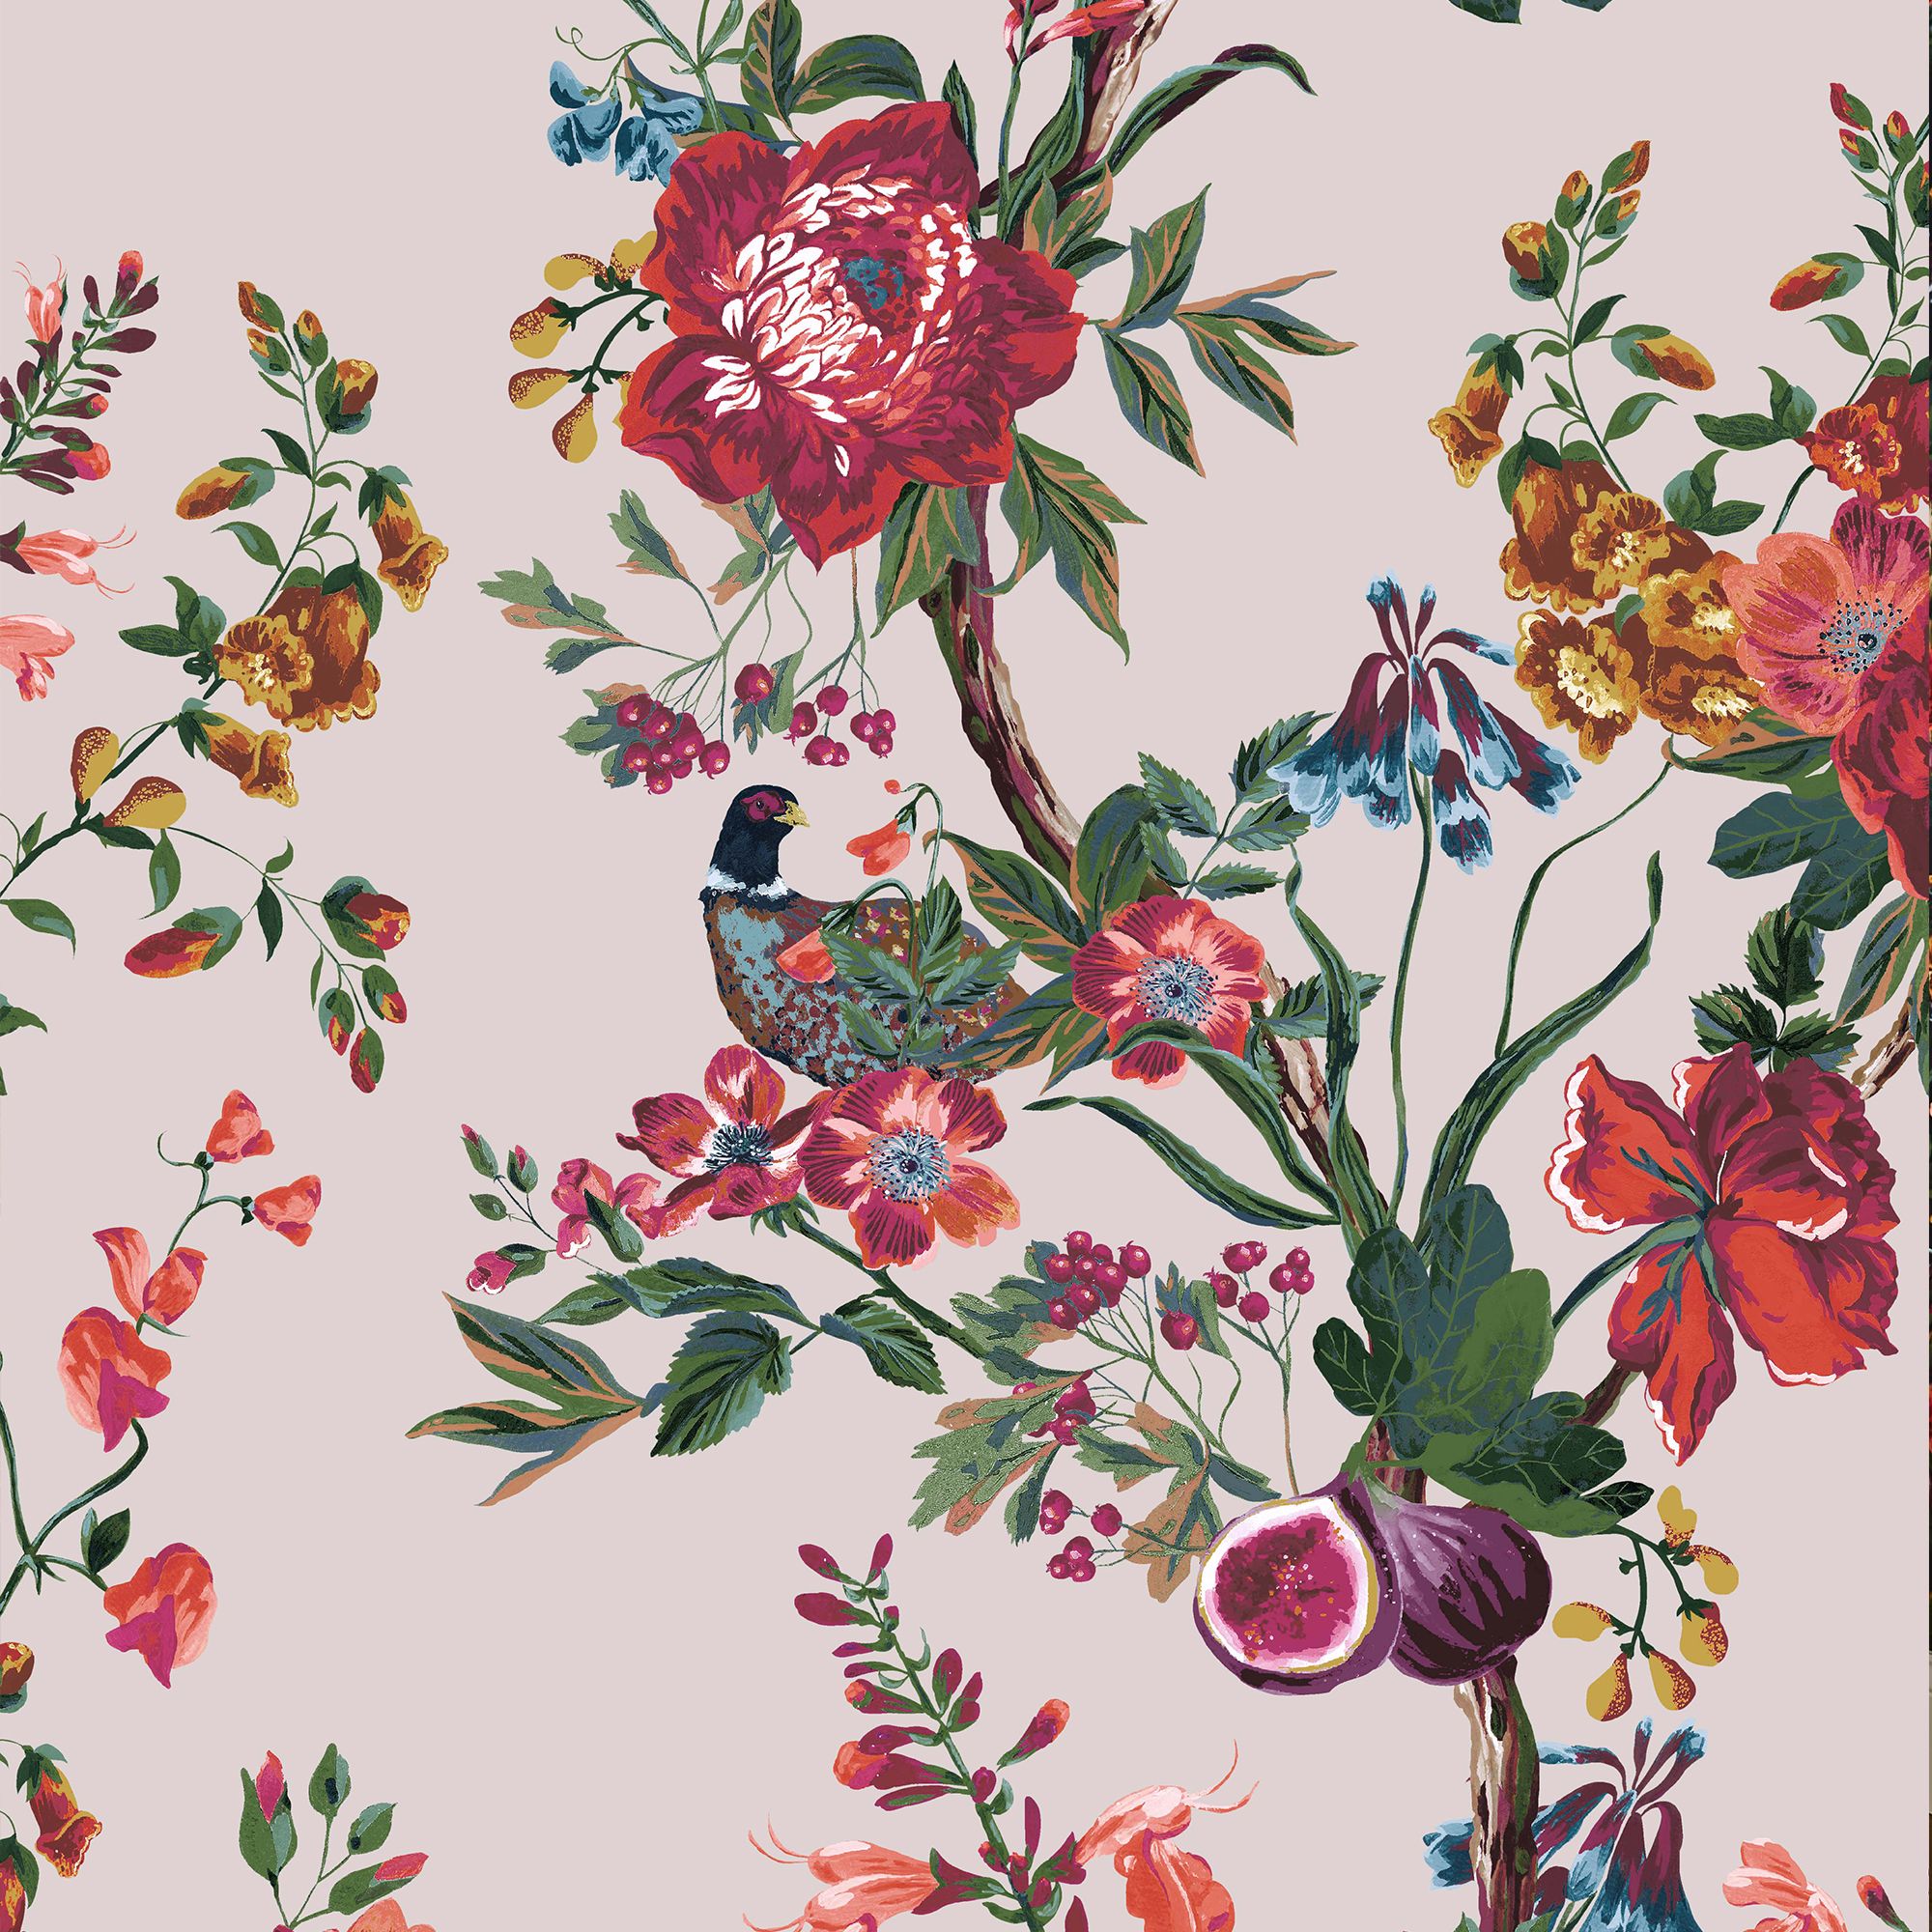 Joules Multicolour Floral forest Smooth Wallpaper Sample